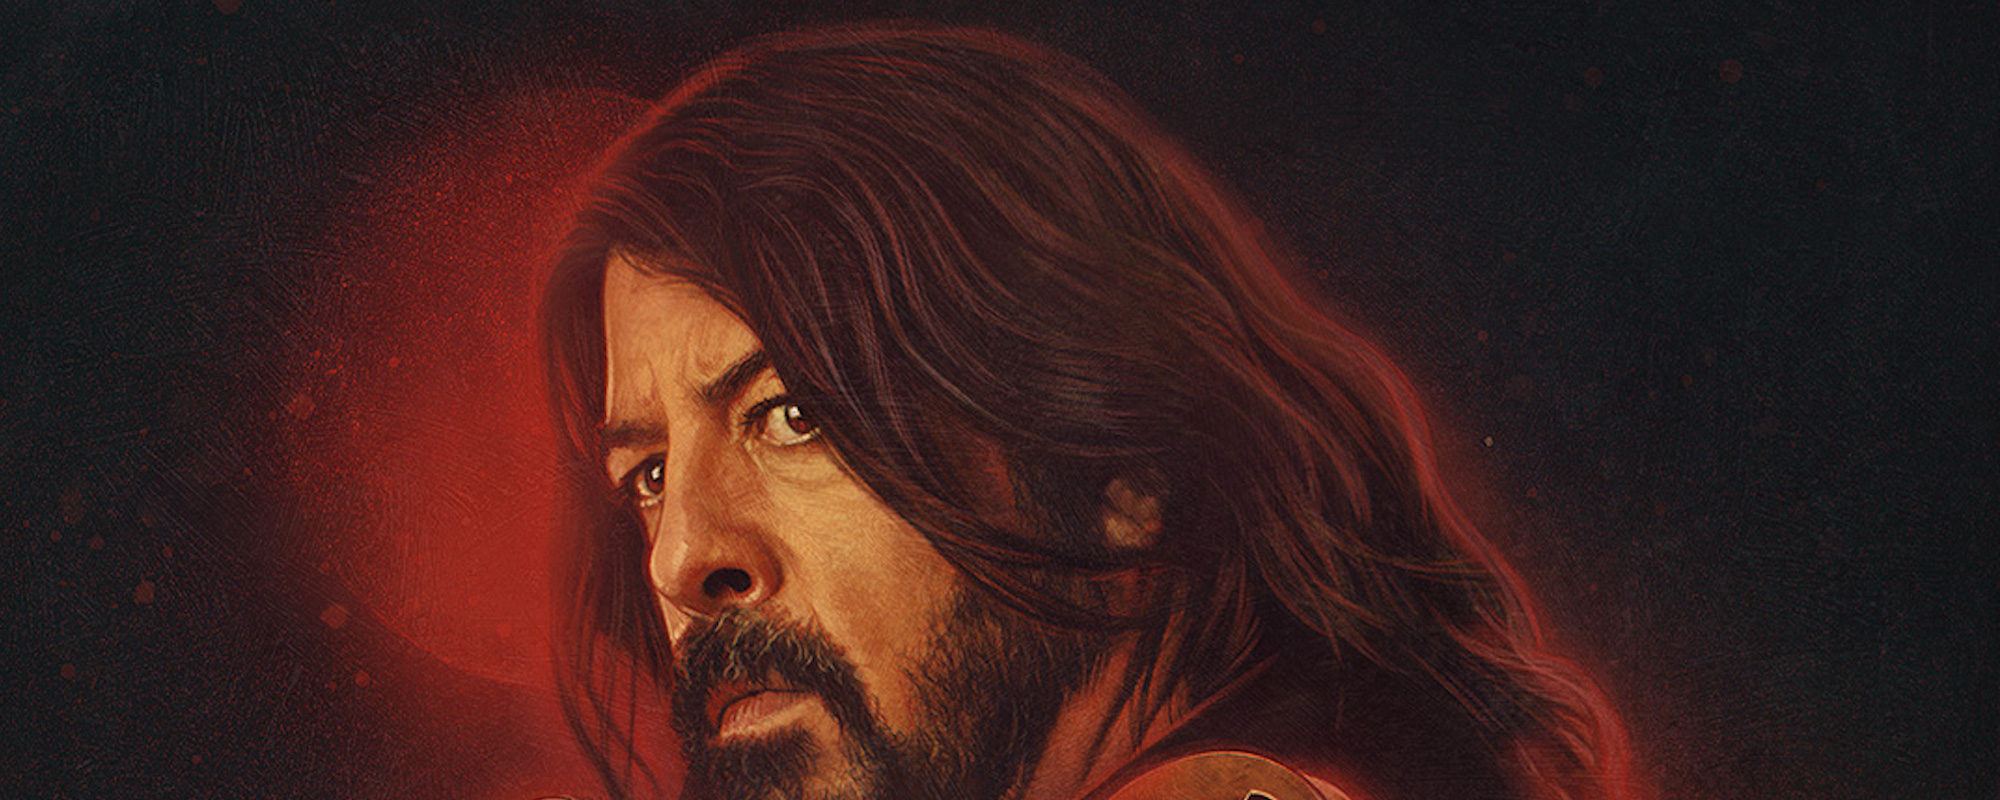 Foo Fighters Share ‘Studio 666’ Trailer with Lionel Ritchie, Slayer Cameos